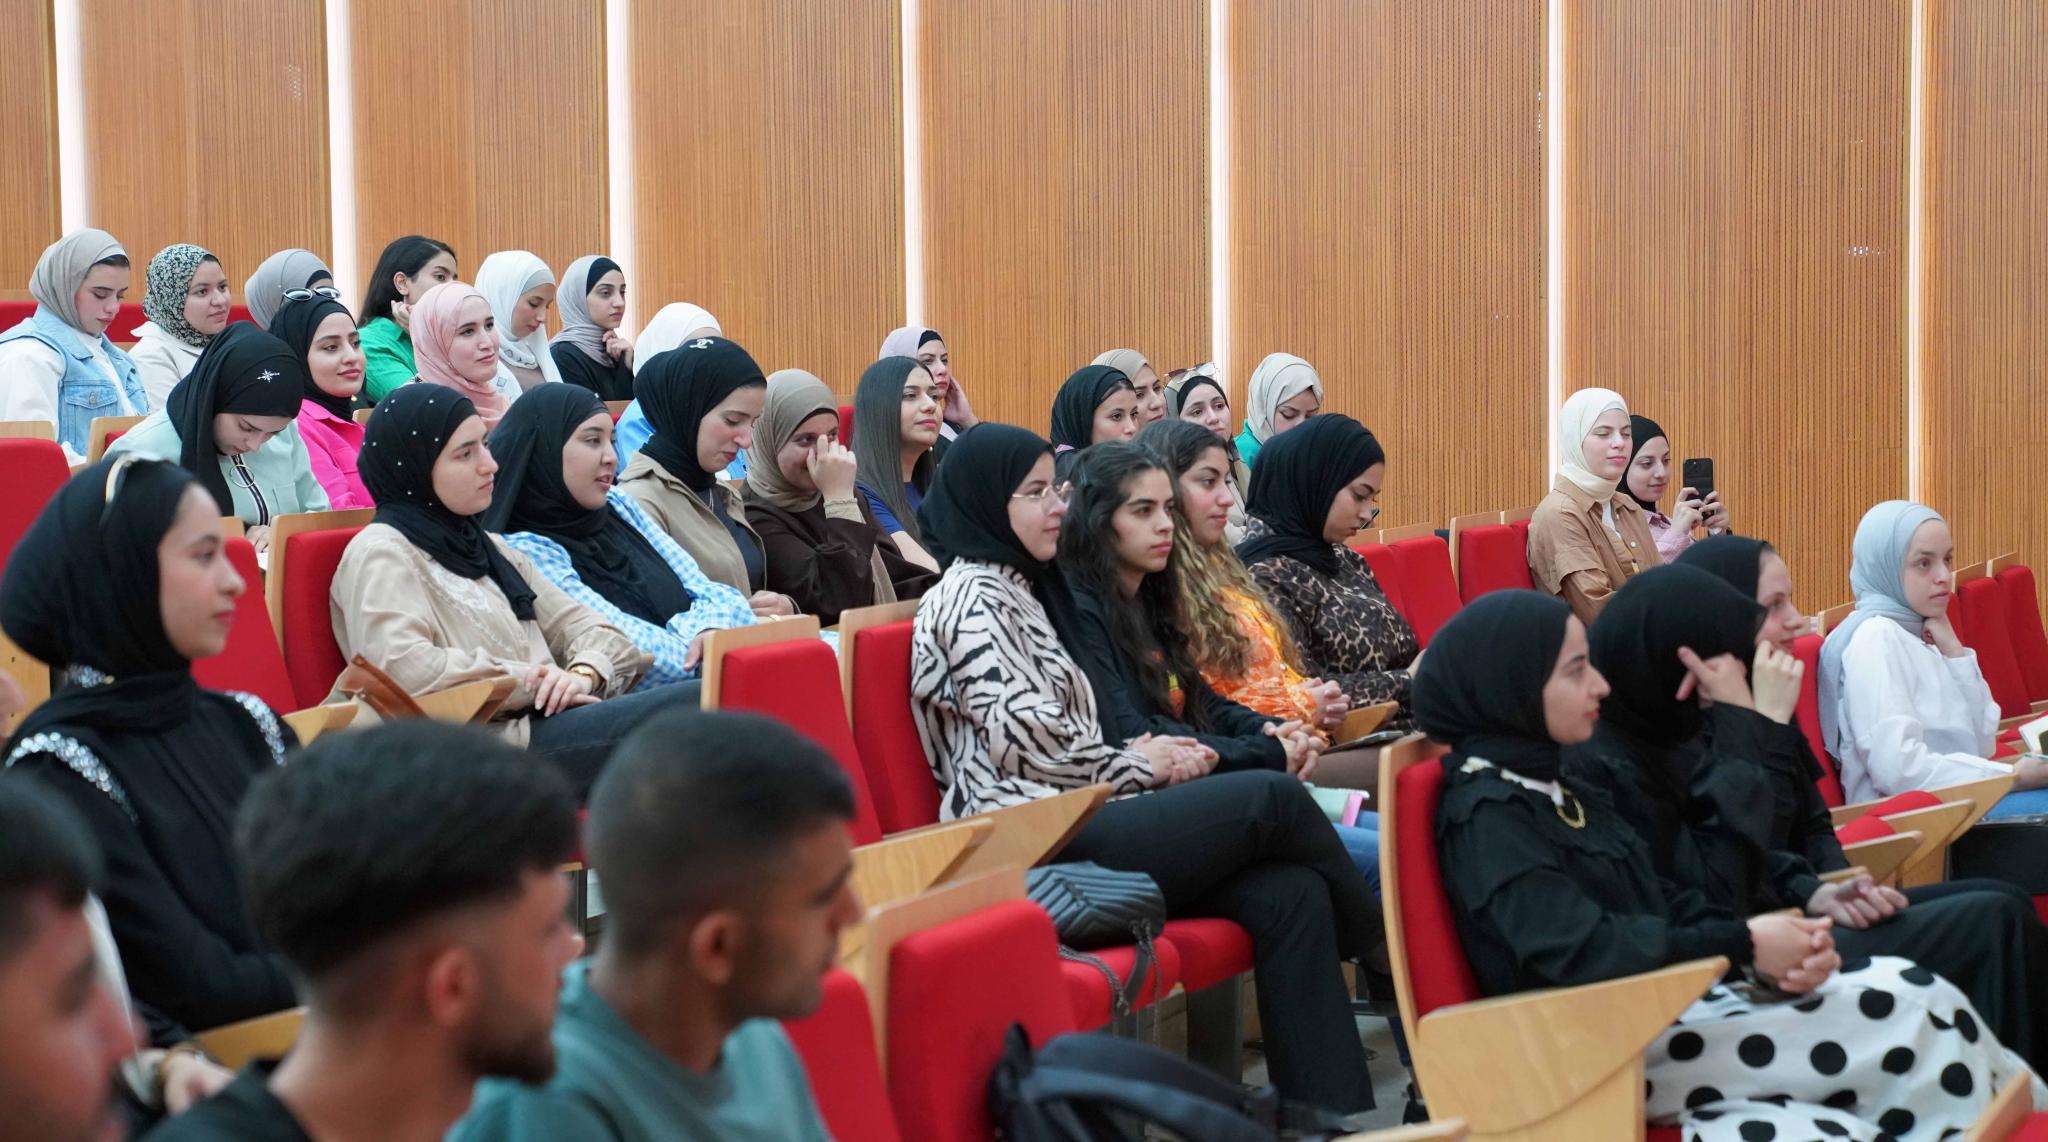 AAUP Hosts the International Trainer Dr. Monther Al-Haram in a Training Workshop for Students on Human Development